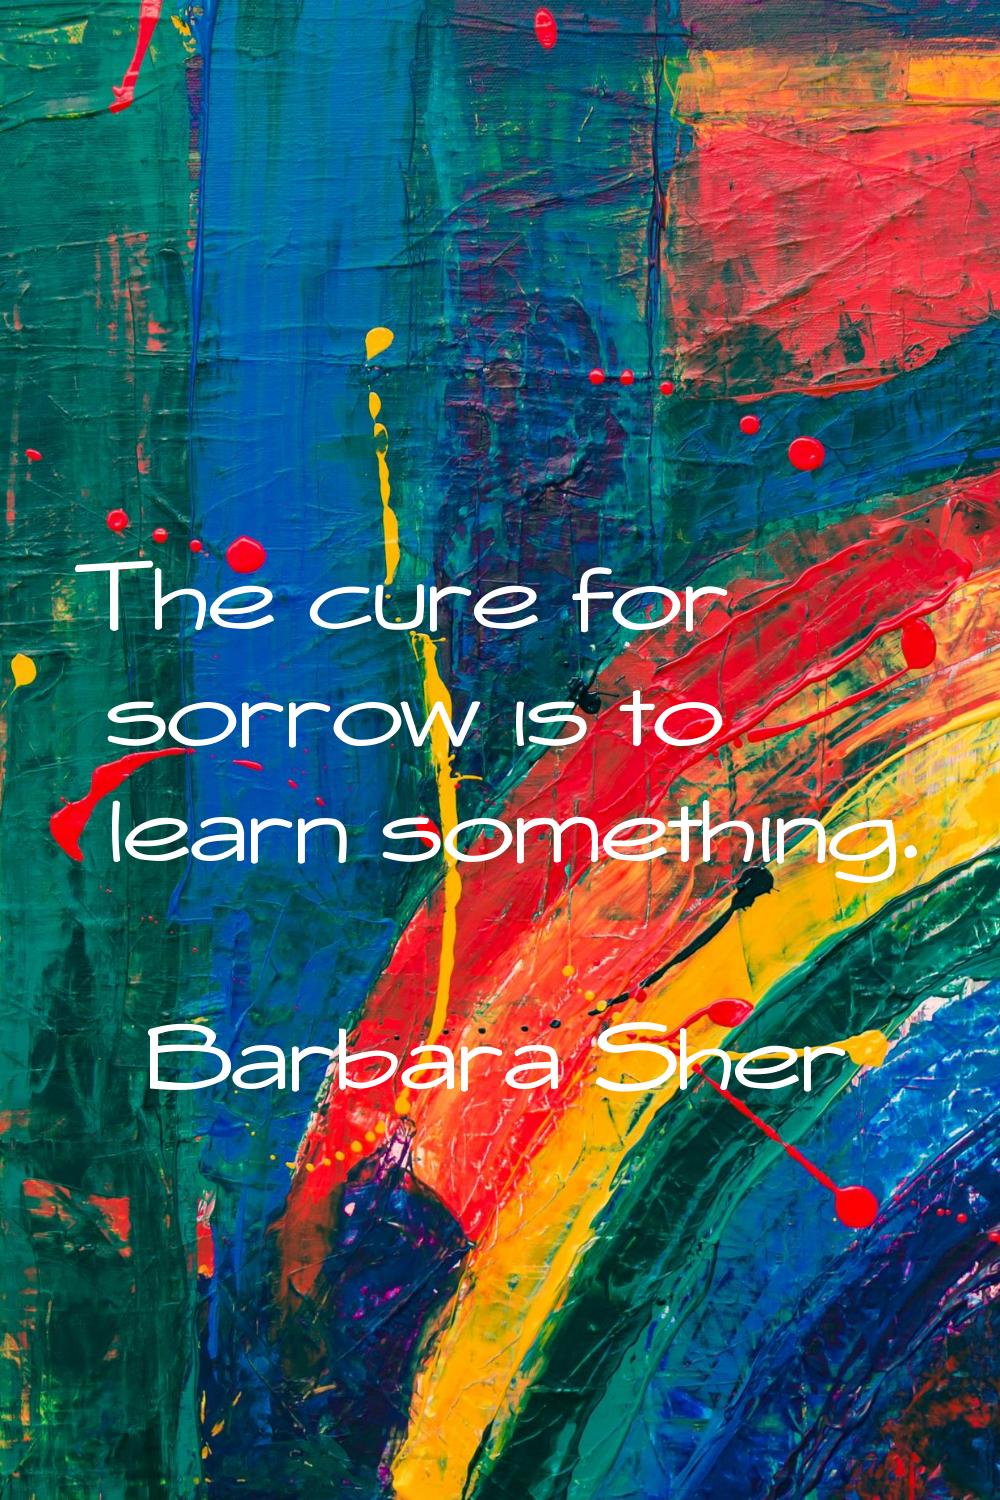 The cure for sorrow is to learn something.